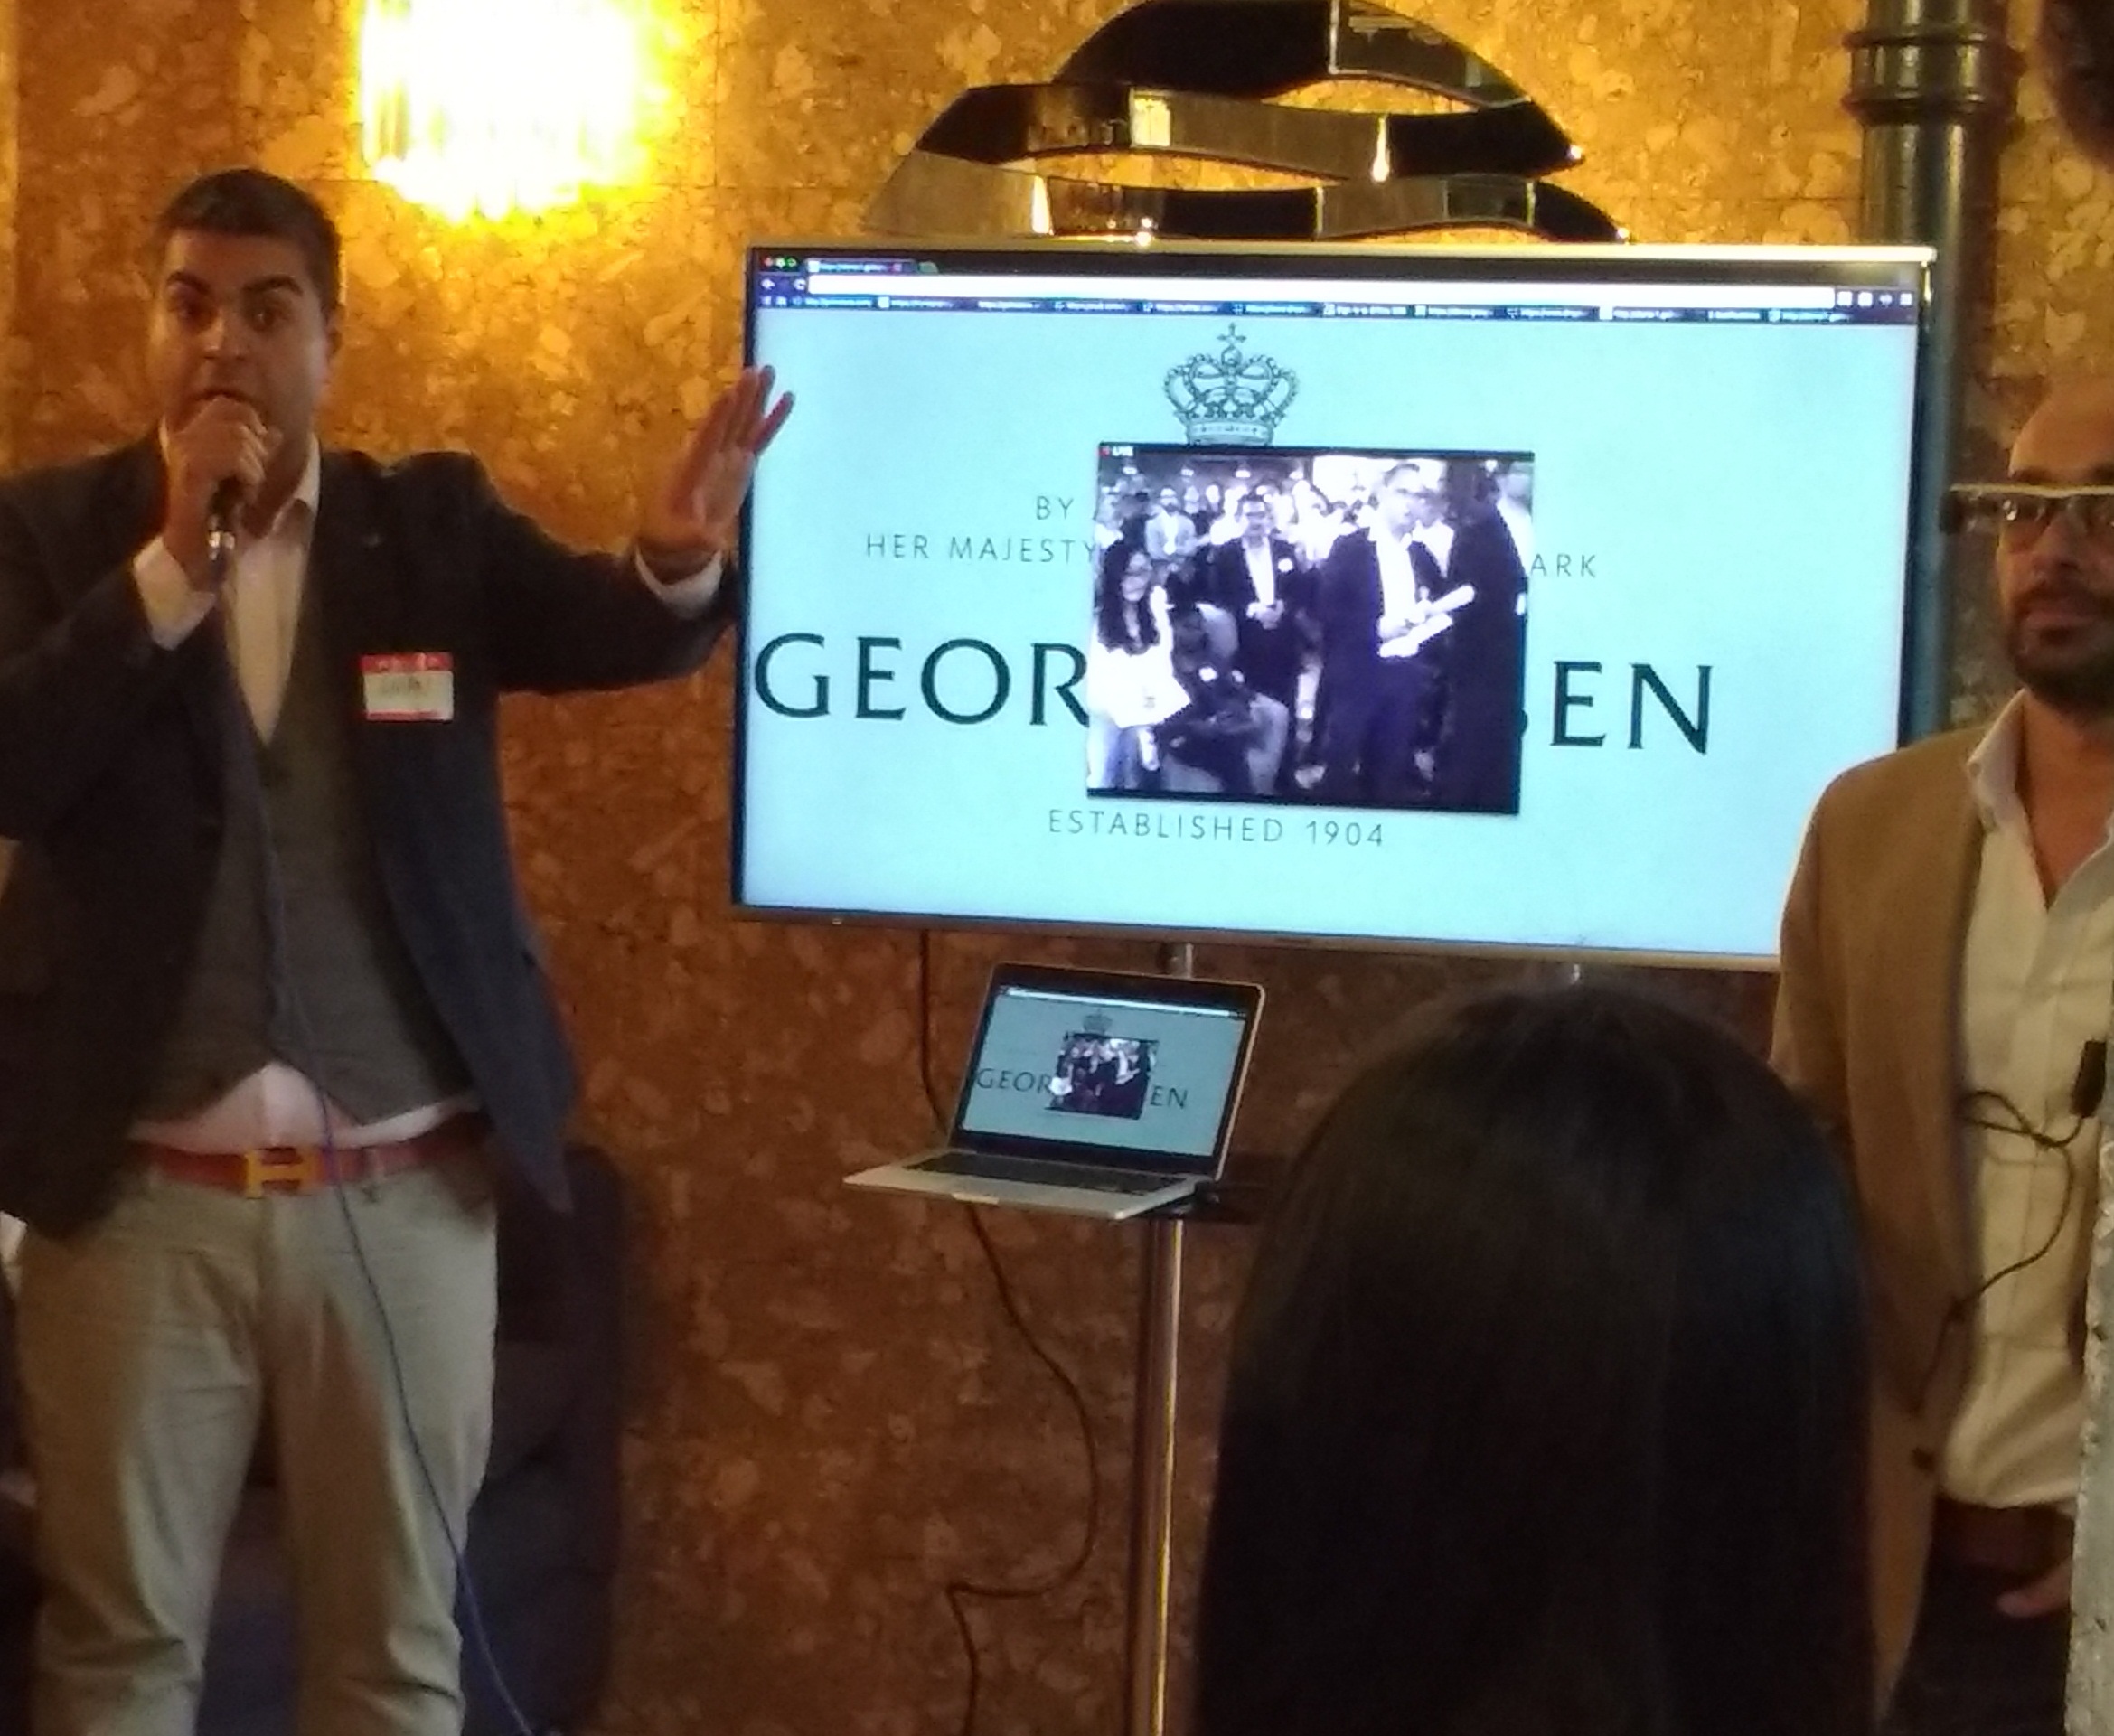 GoInStore at the Tech London Advocates event